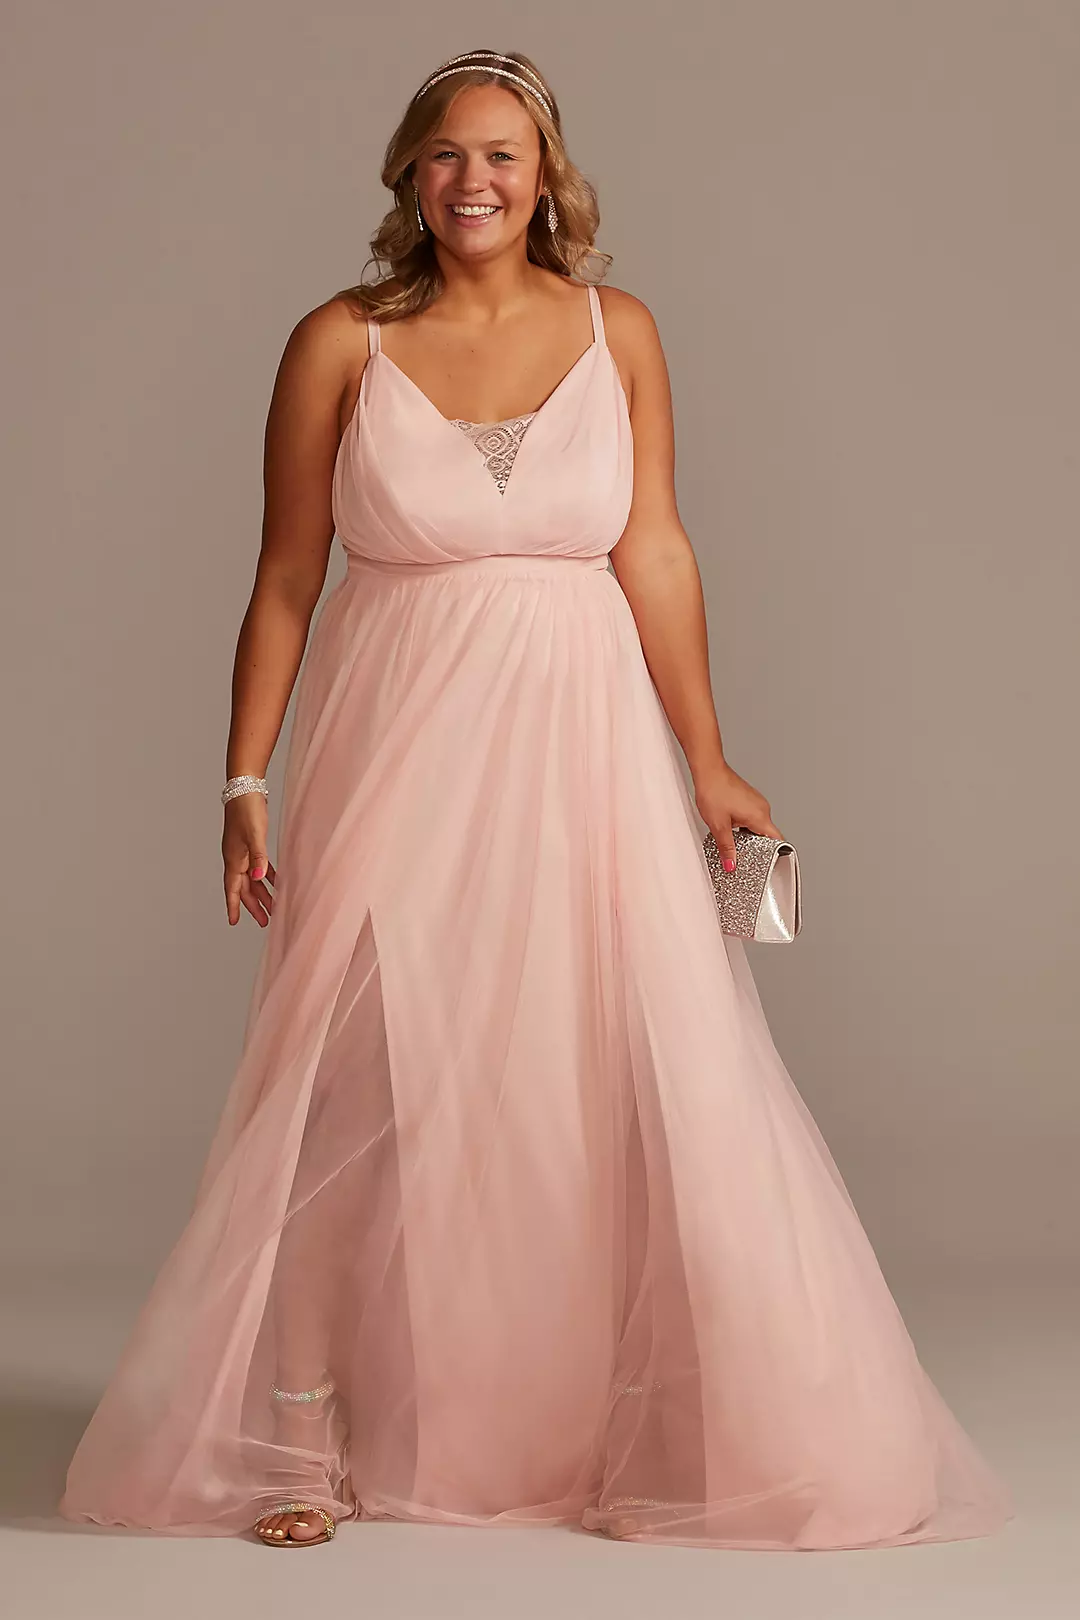 Tulle Illusion Plunge Spaghetti Strap A-Line Gown Image